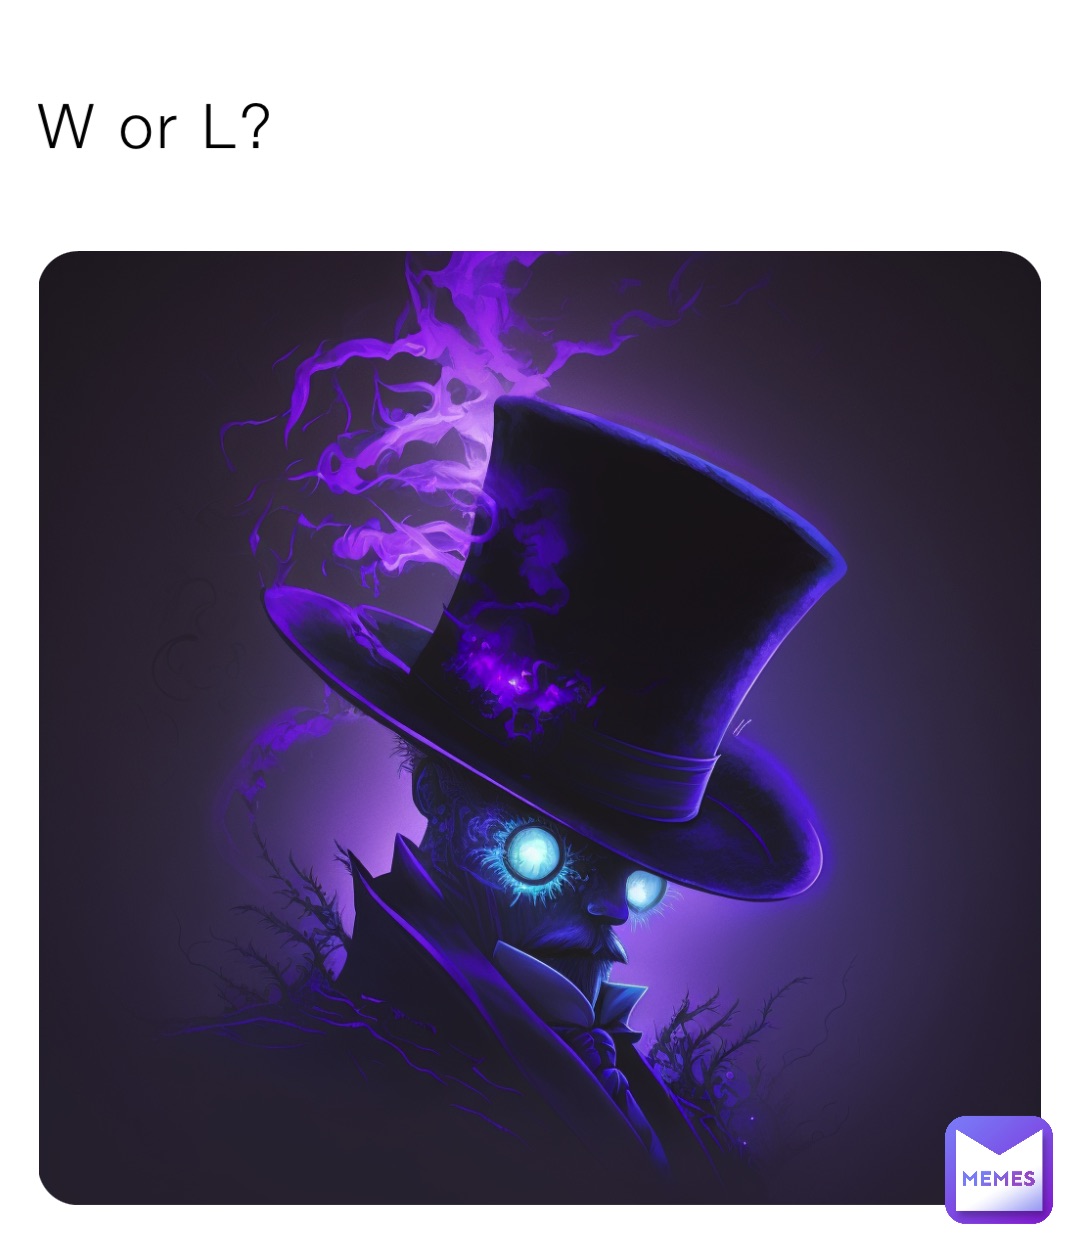 W or L?